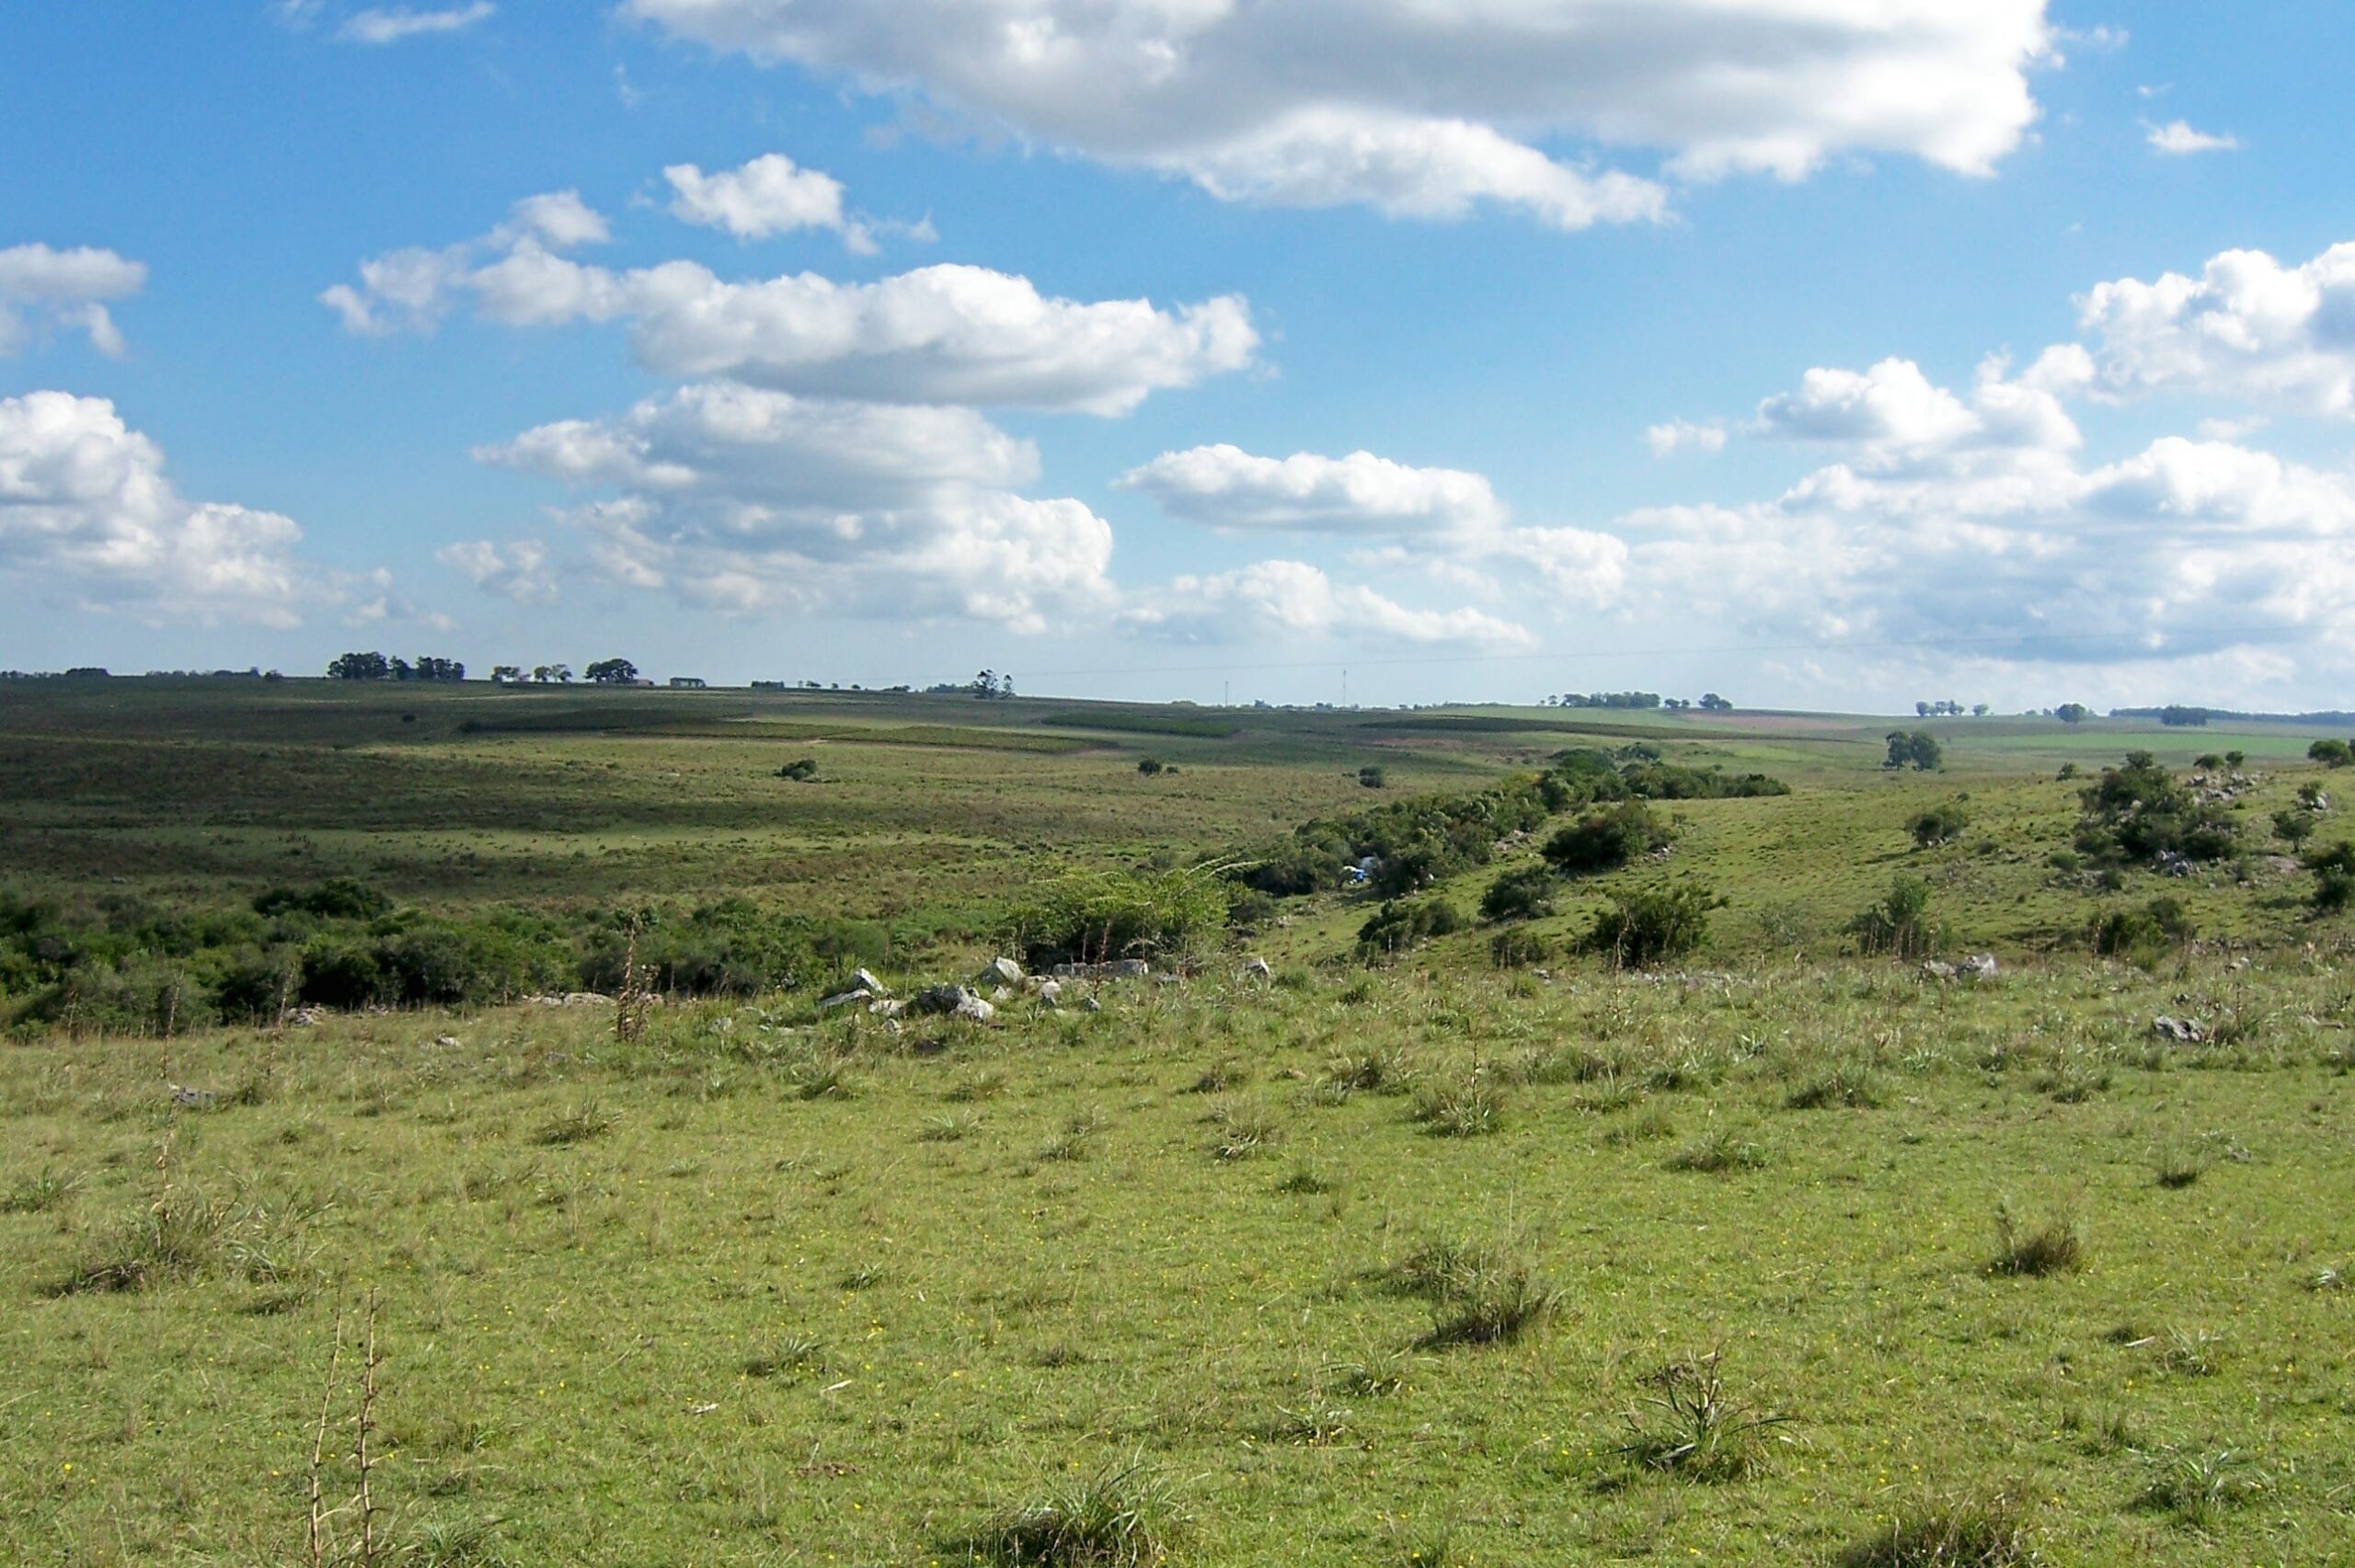 Photograph of Uruguayan savanna. The photo shows a very gently rolling landscape carpeted with short grasses and shrubs.